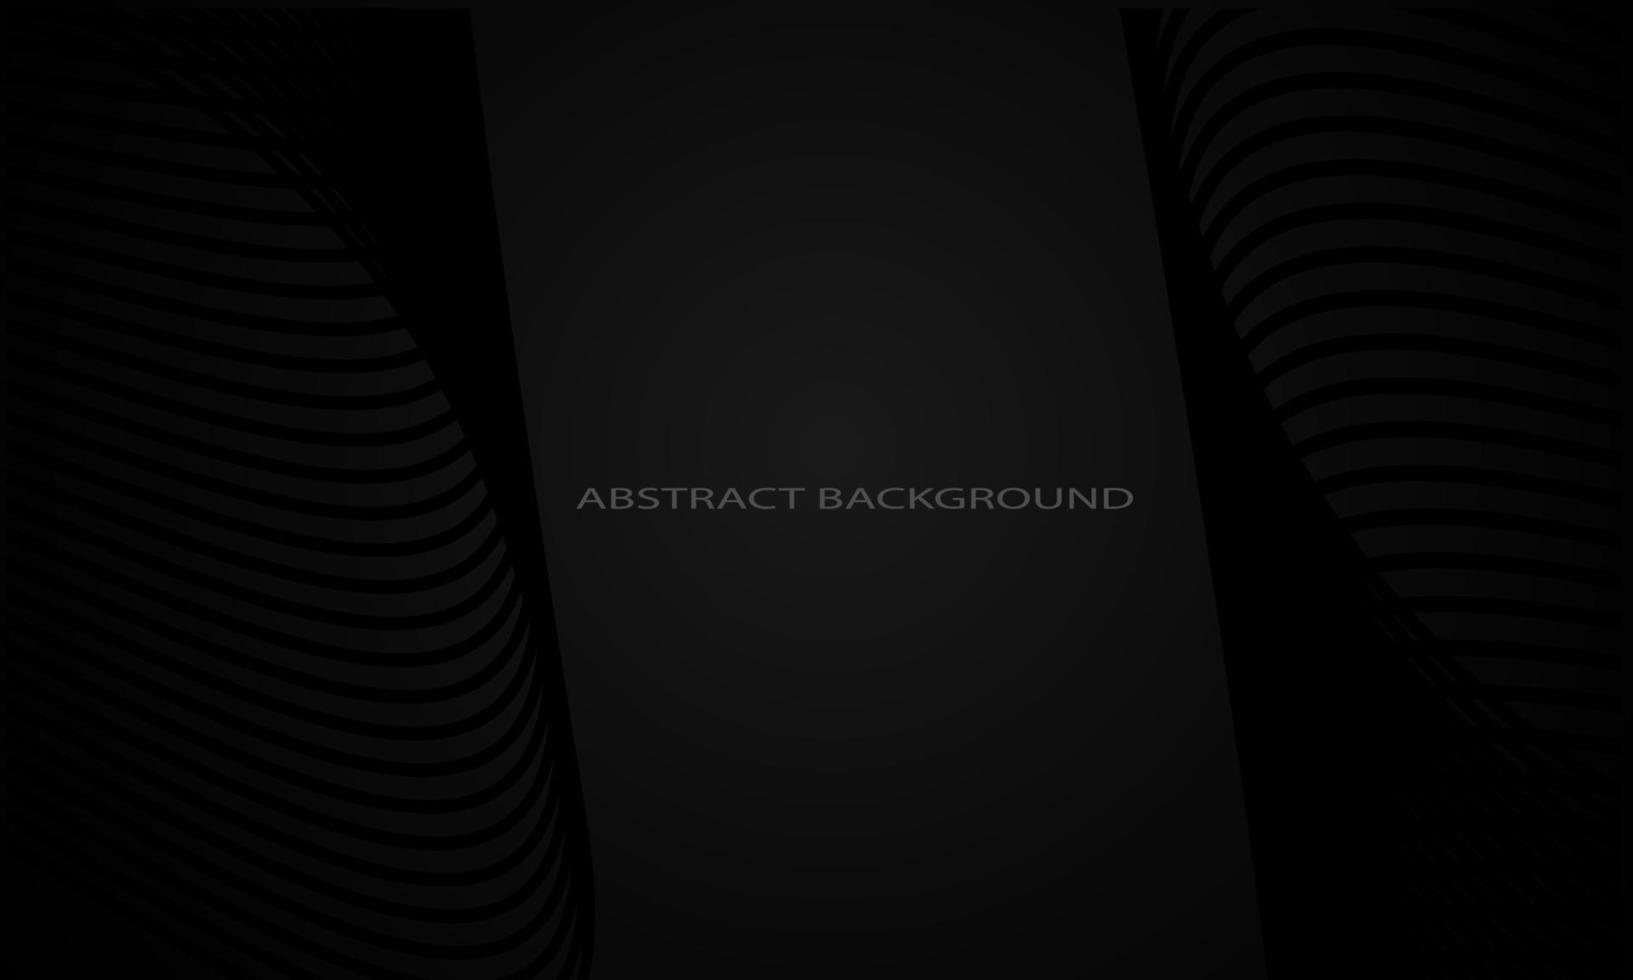 dark background with elegant dark abstract lines with text for banner, cover, poster, billboard vector